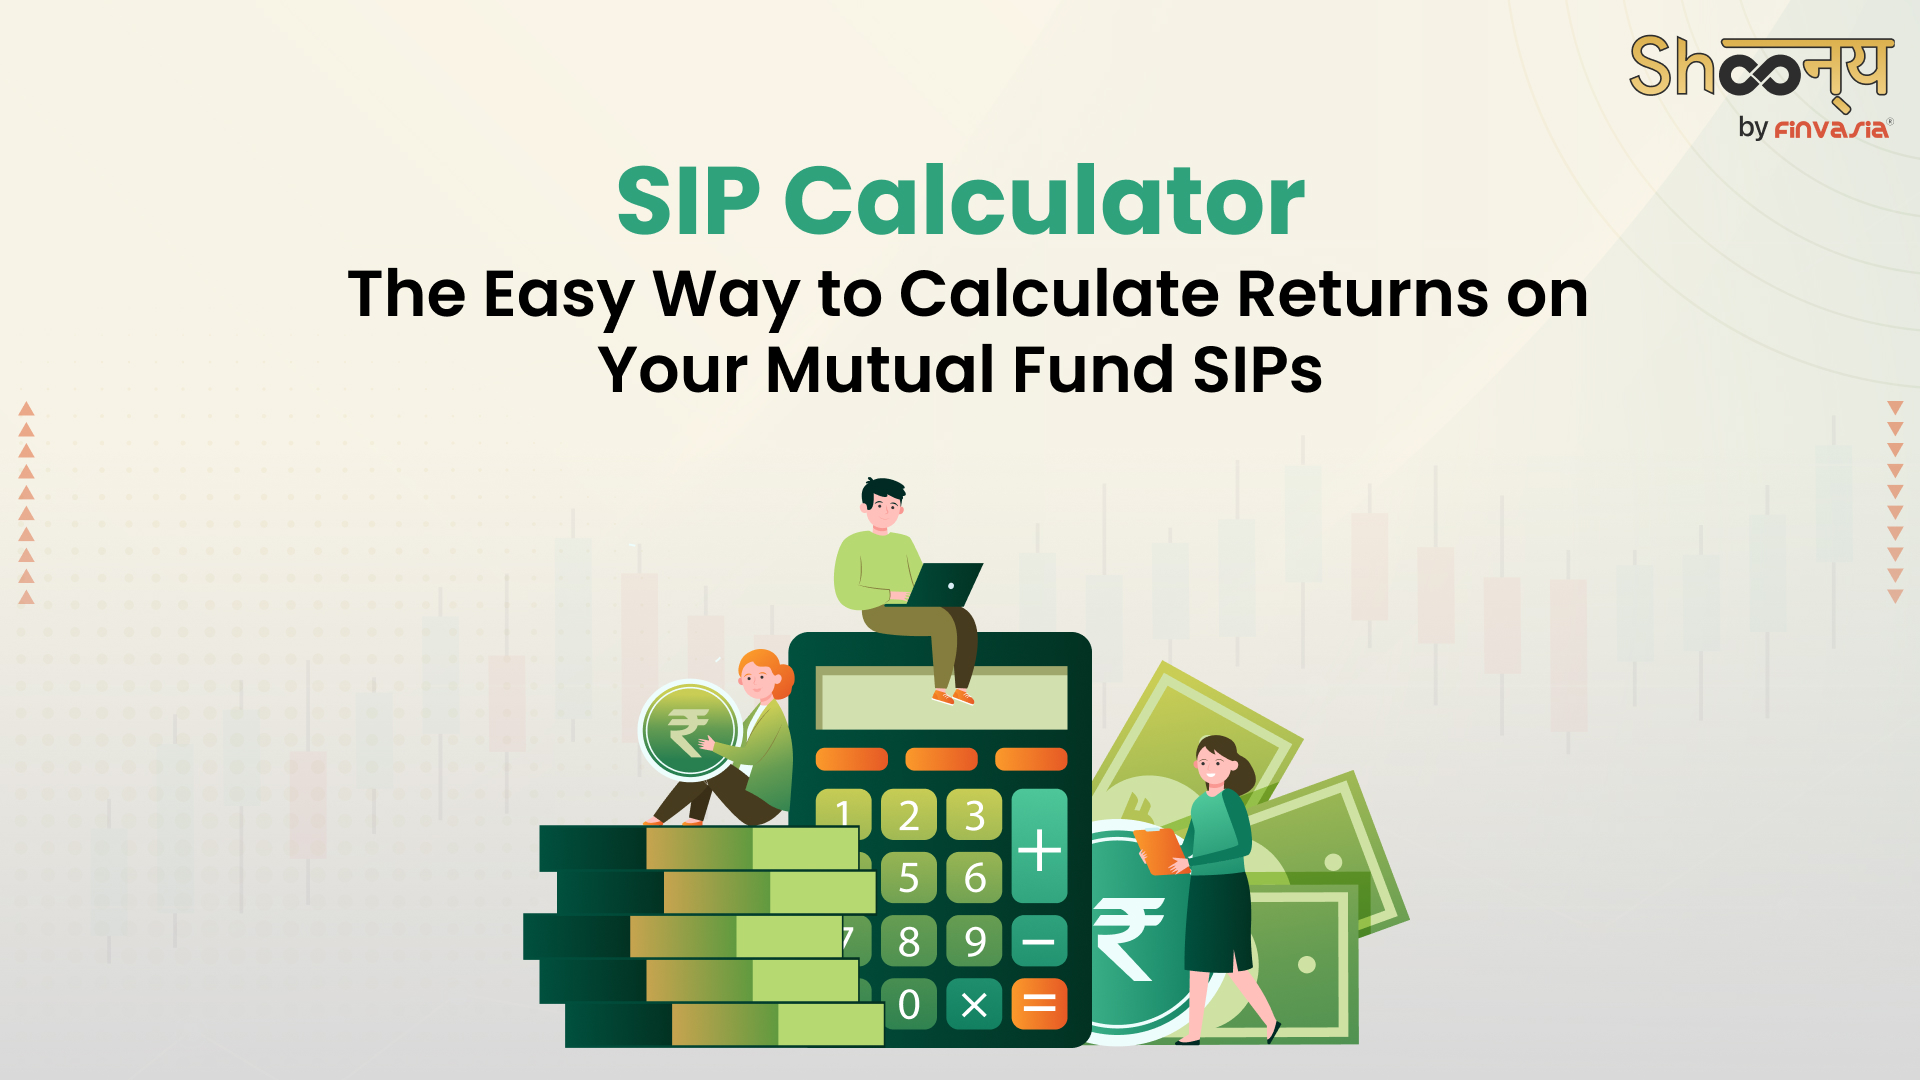 How to Calculate SIP with a SIP Calculator?